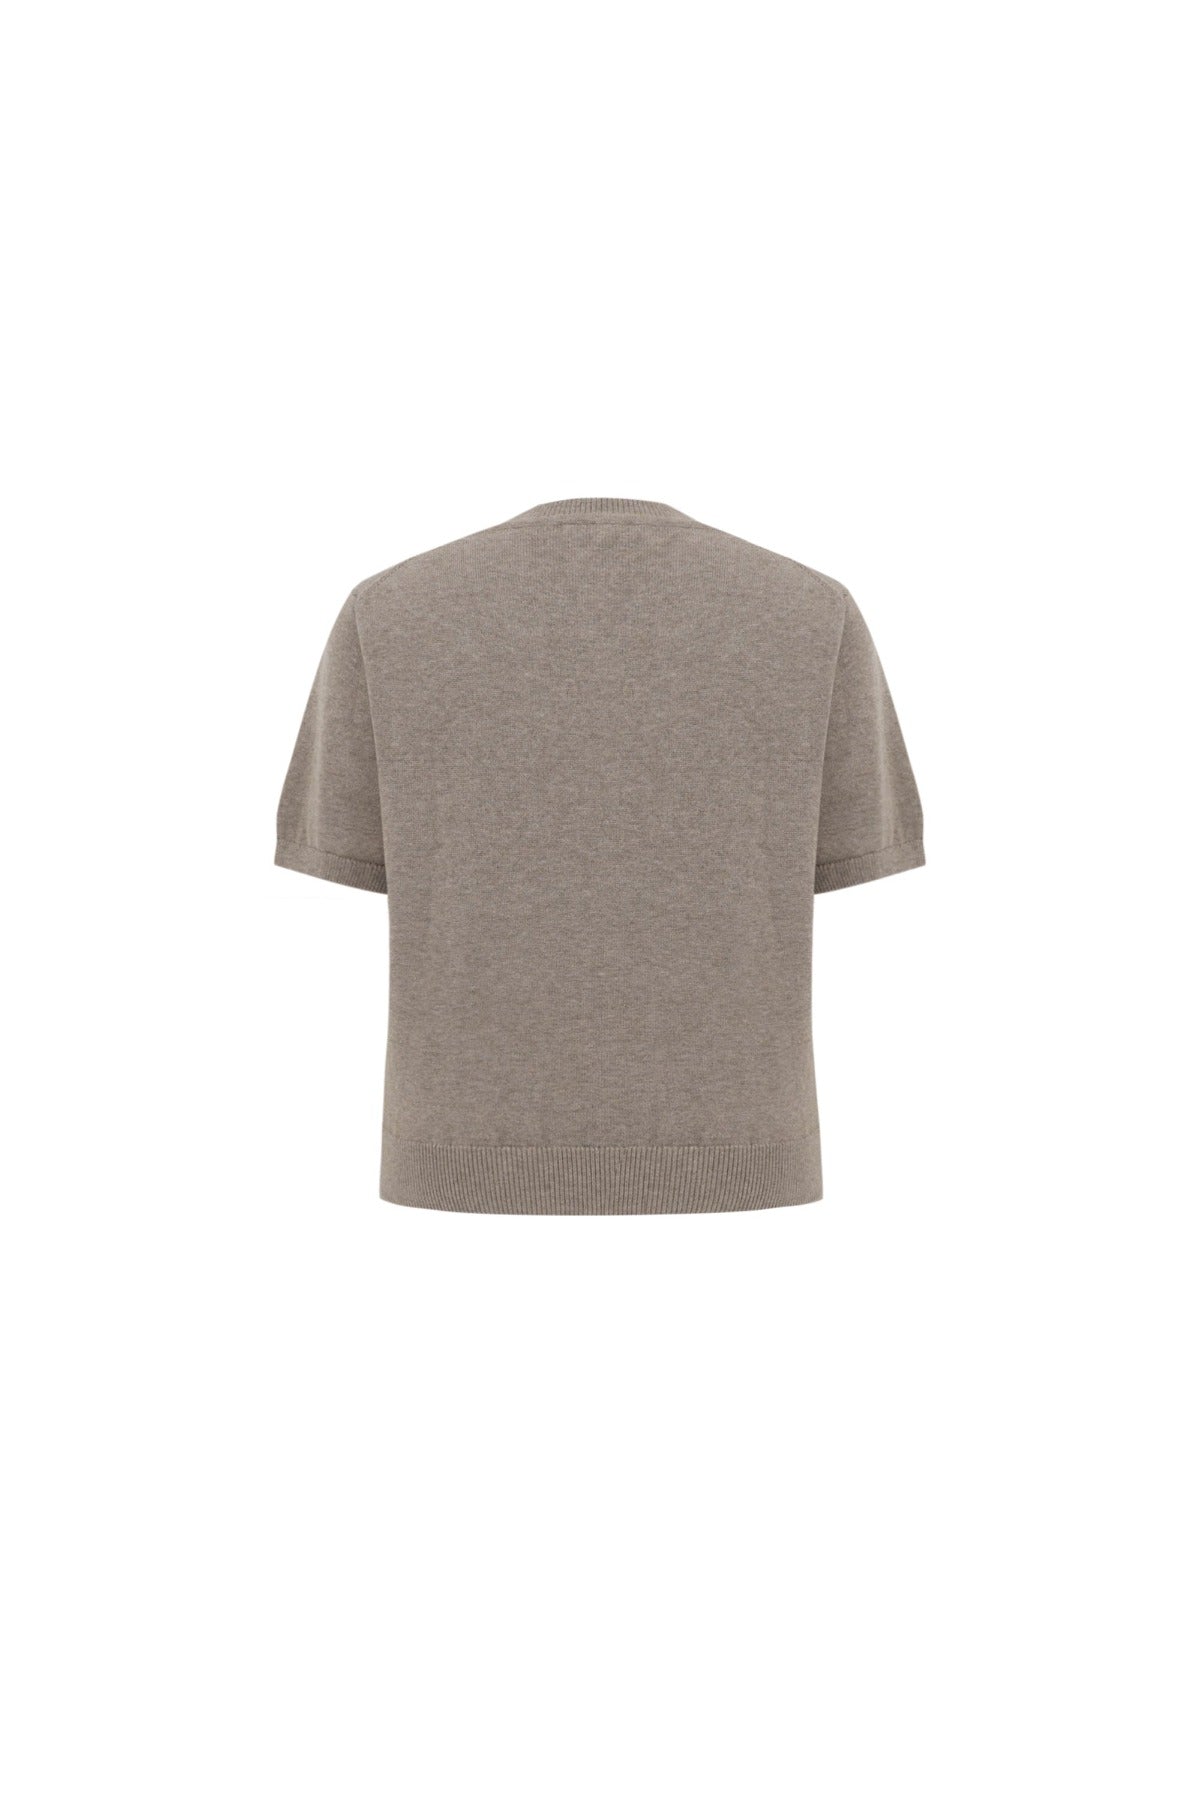 Cotton Cashmere Knit In Brown